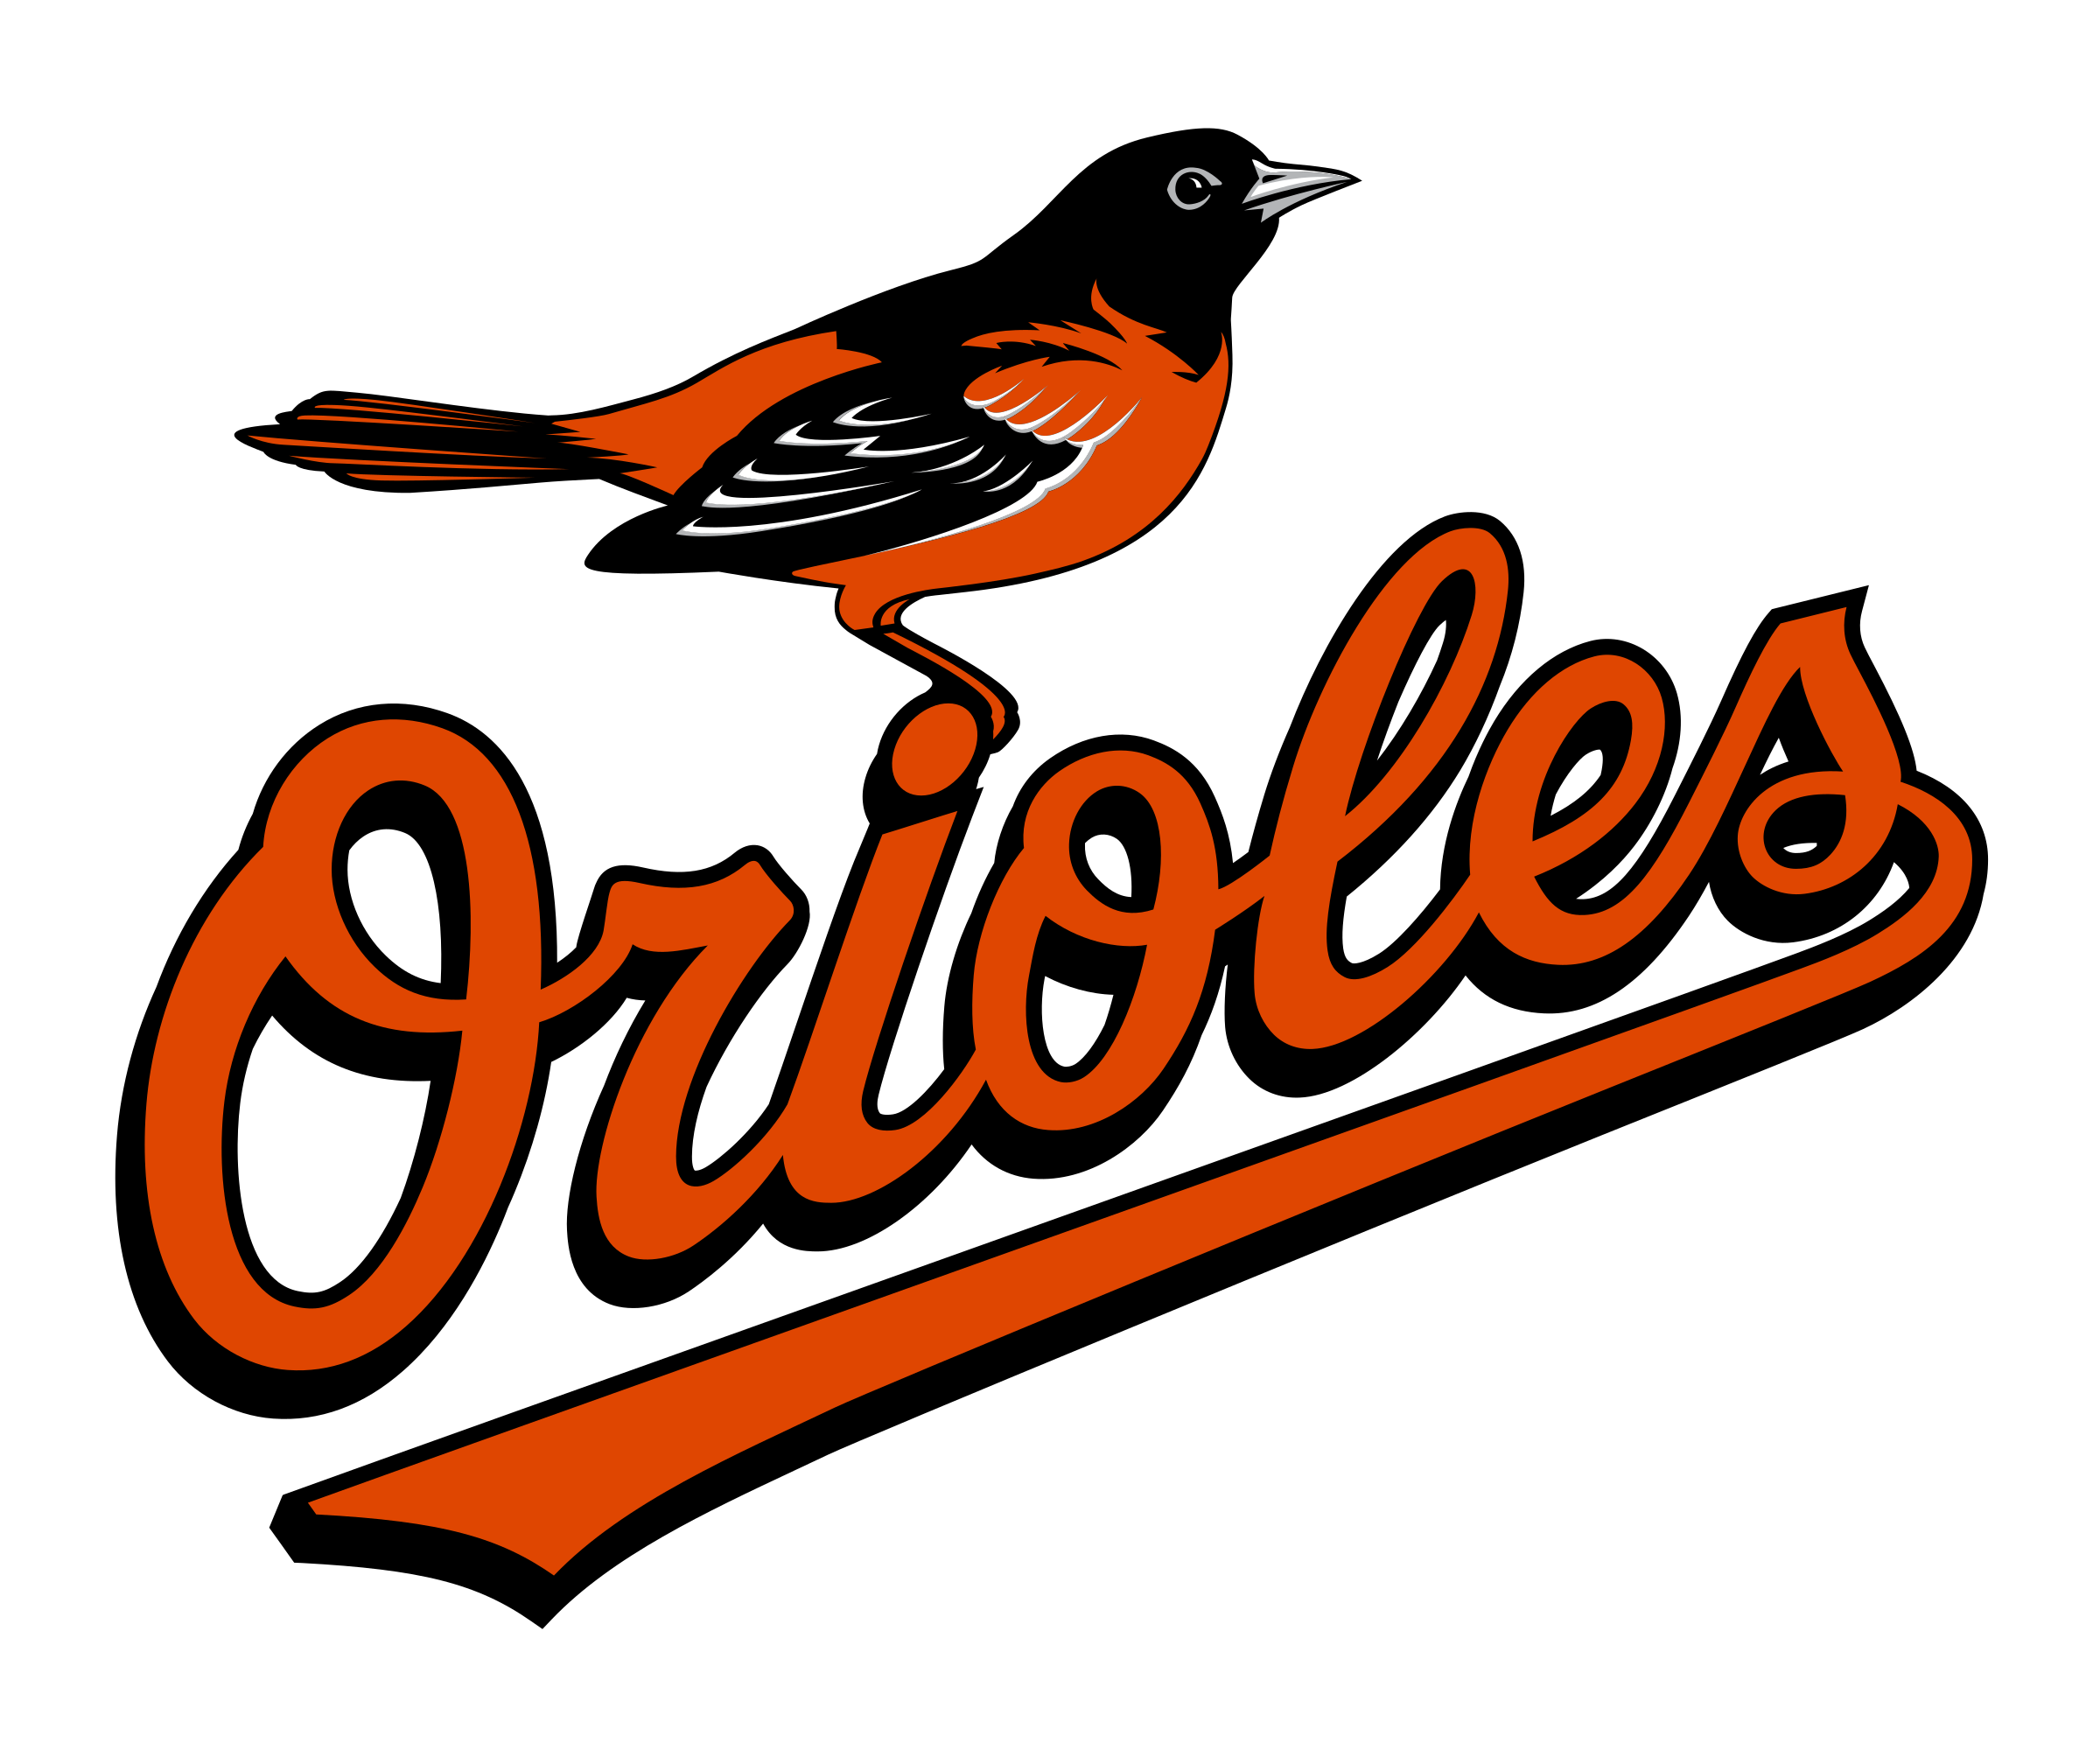 Baltimore Orioles Odds & Bets